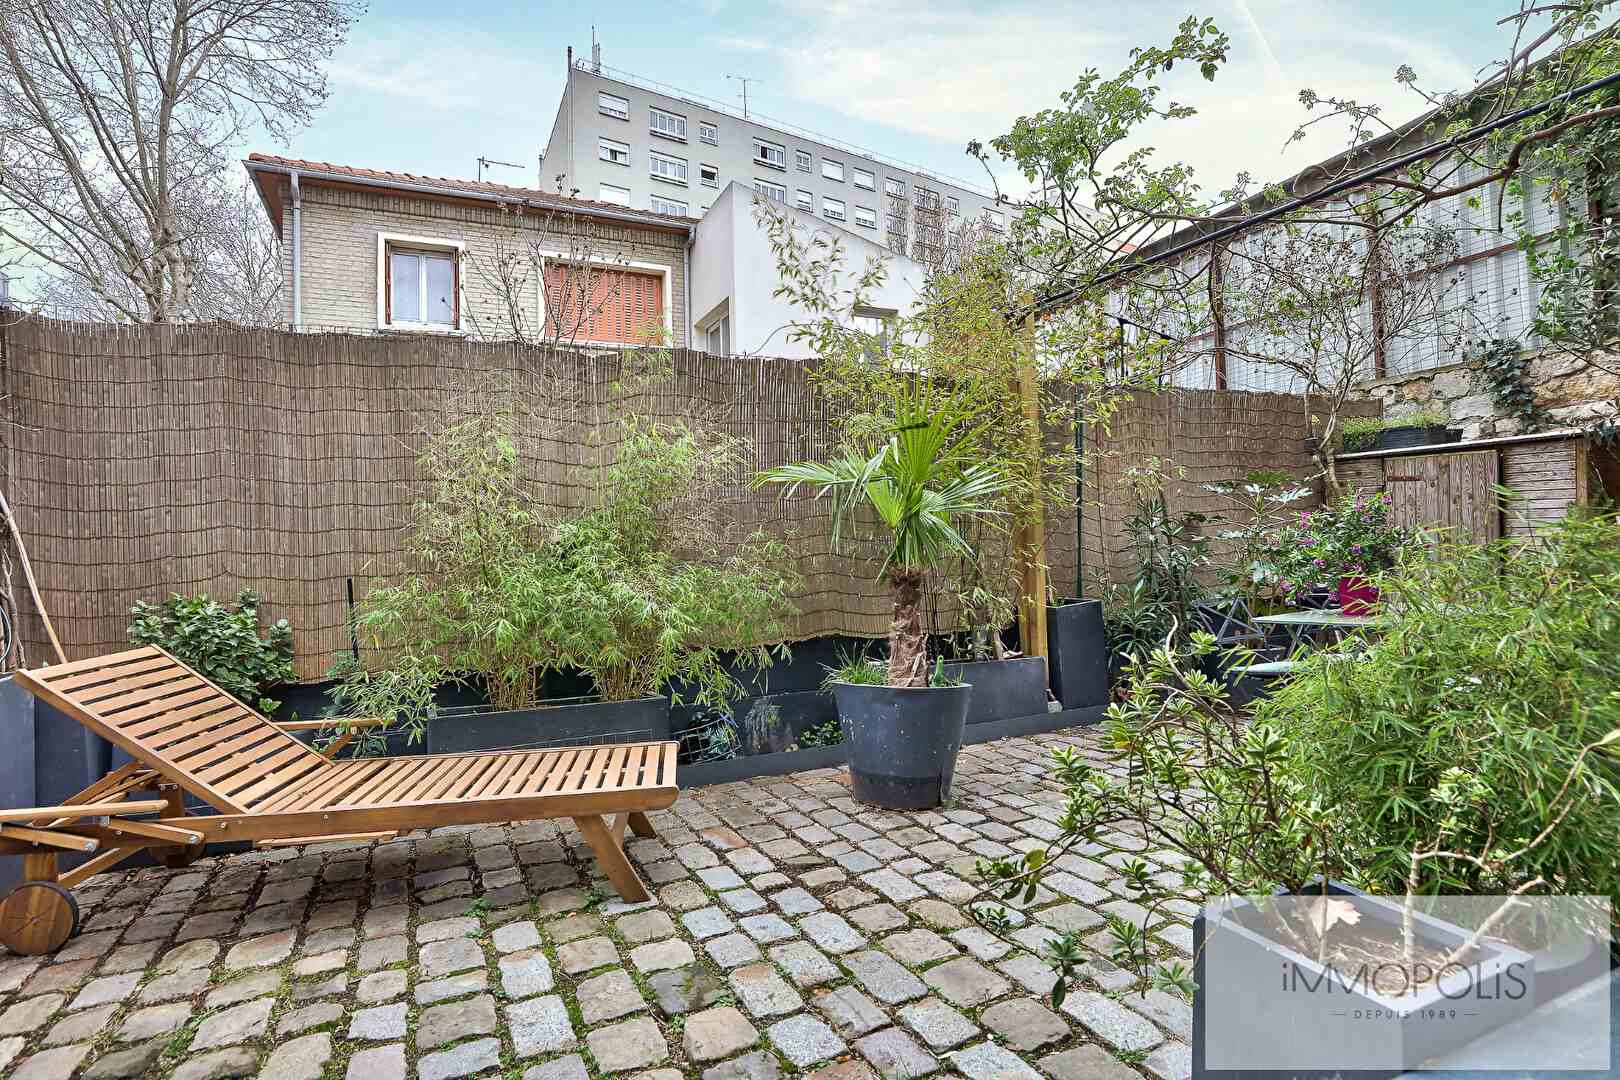 Off-Market: House with exceptional services in Saint Ouen sur Seine, 6 rooms, large reception, 1 interior courtyard and 1 terrace 1